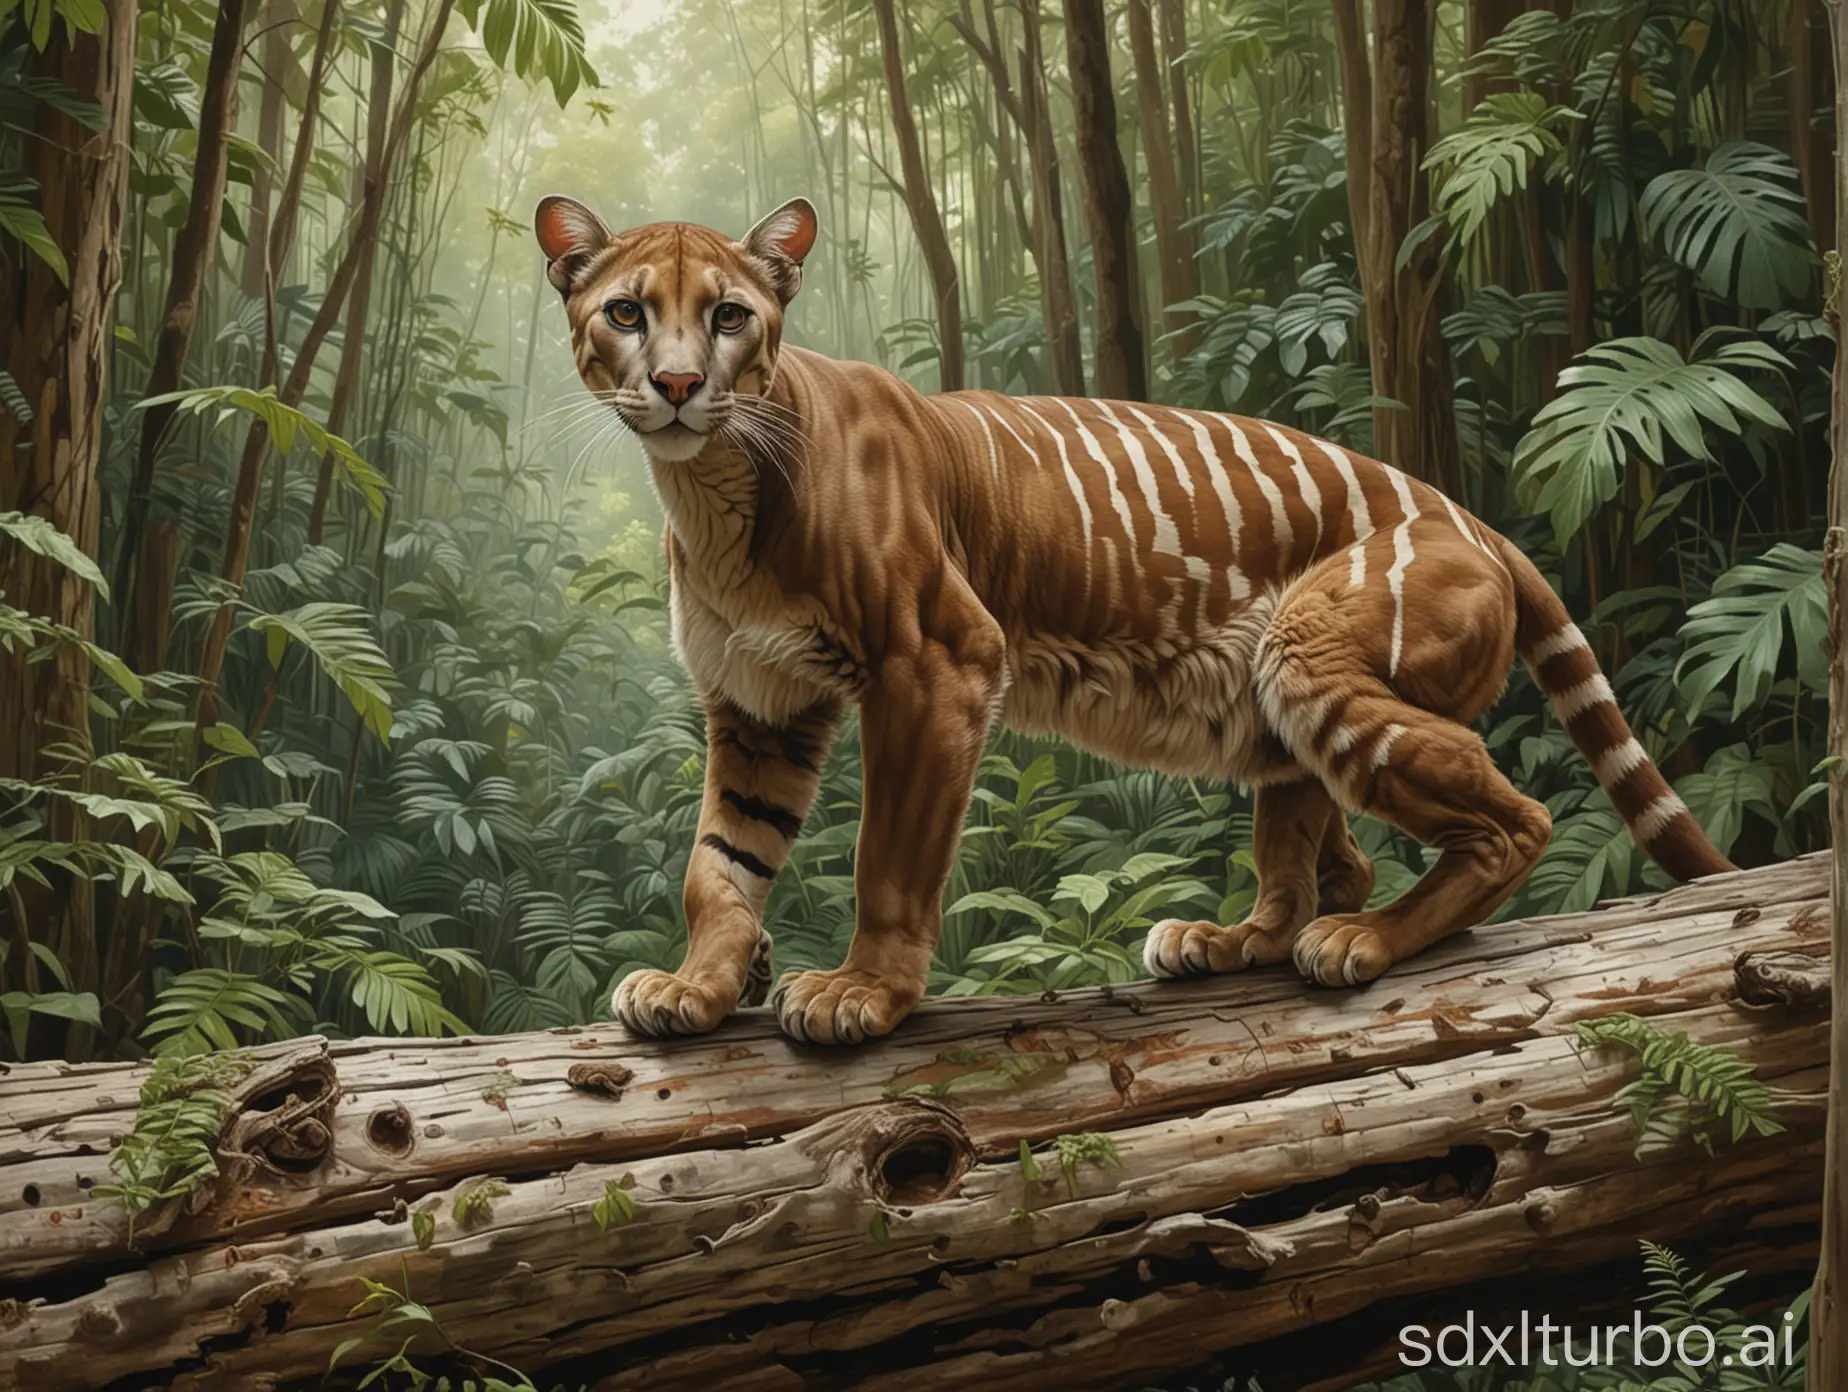 A brown puma with white stripes coloring, walking on a fallen tree trunk, with a background of lush rainforest, in the style of painting by Leyendecker.